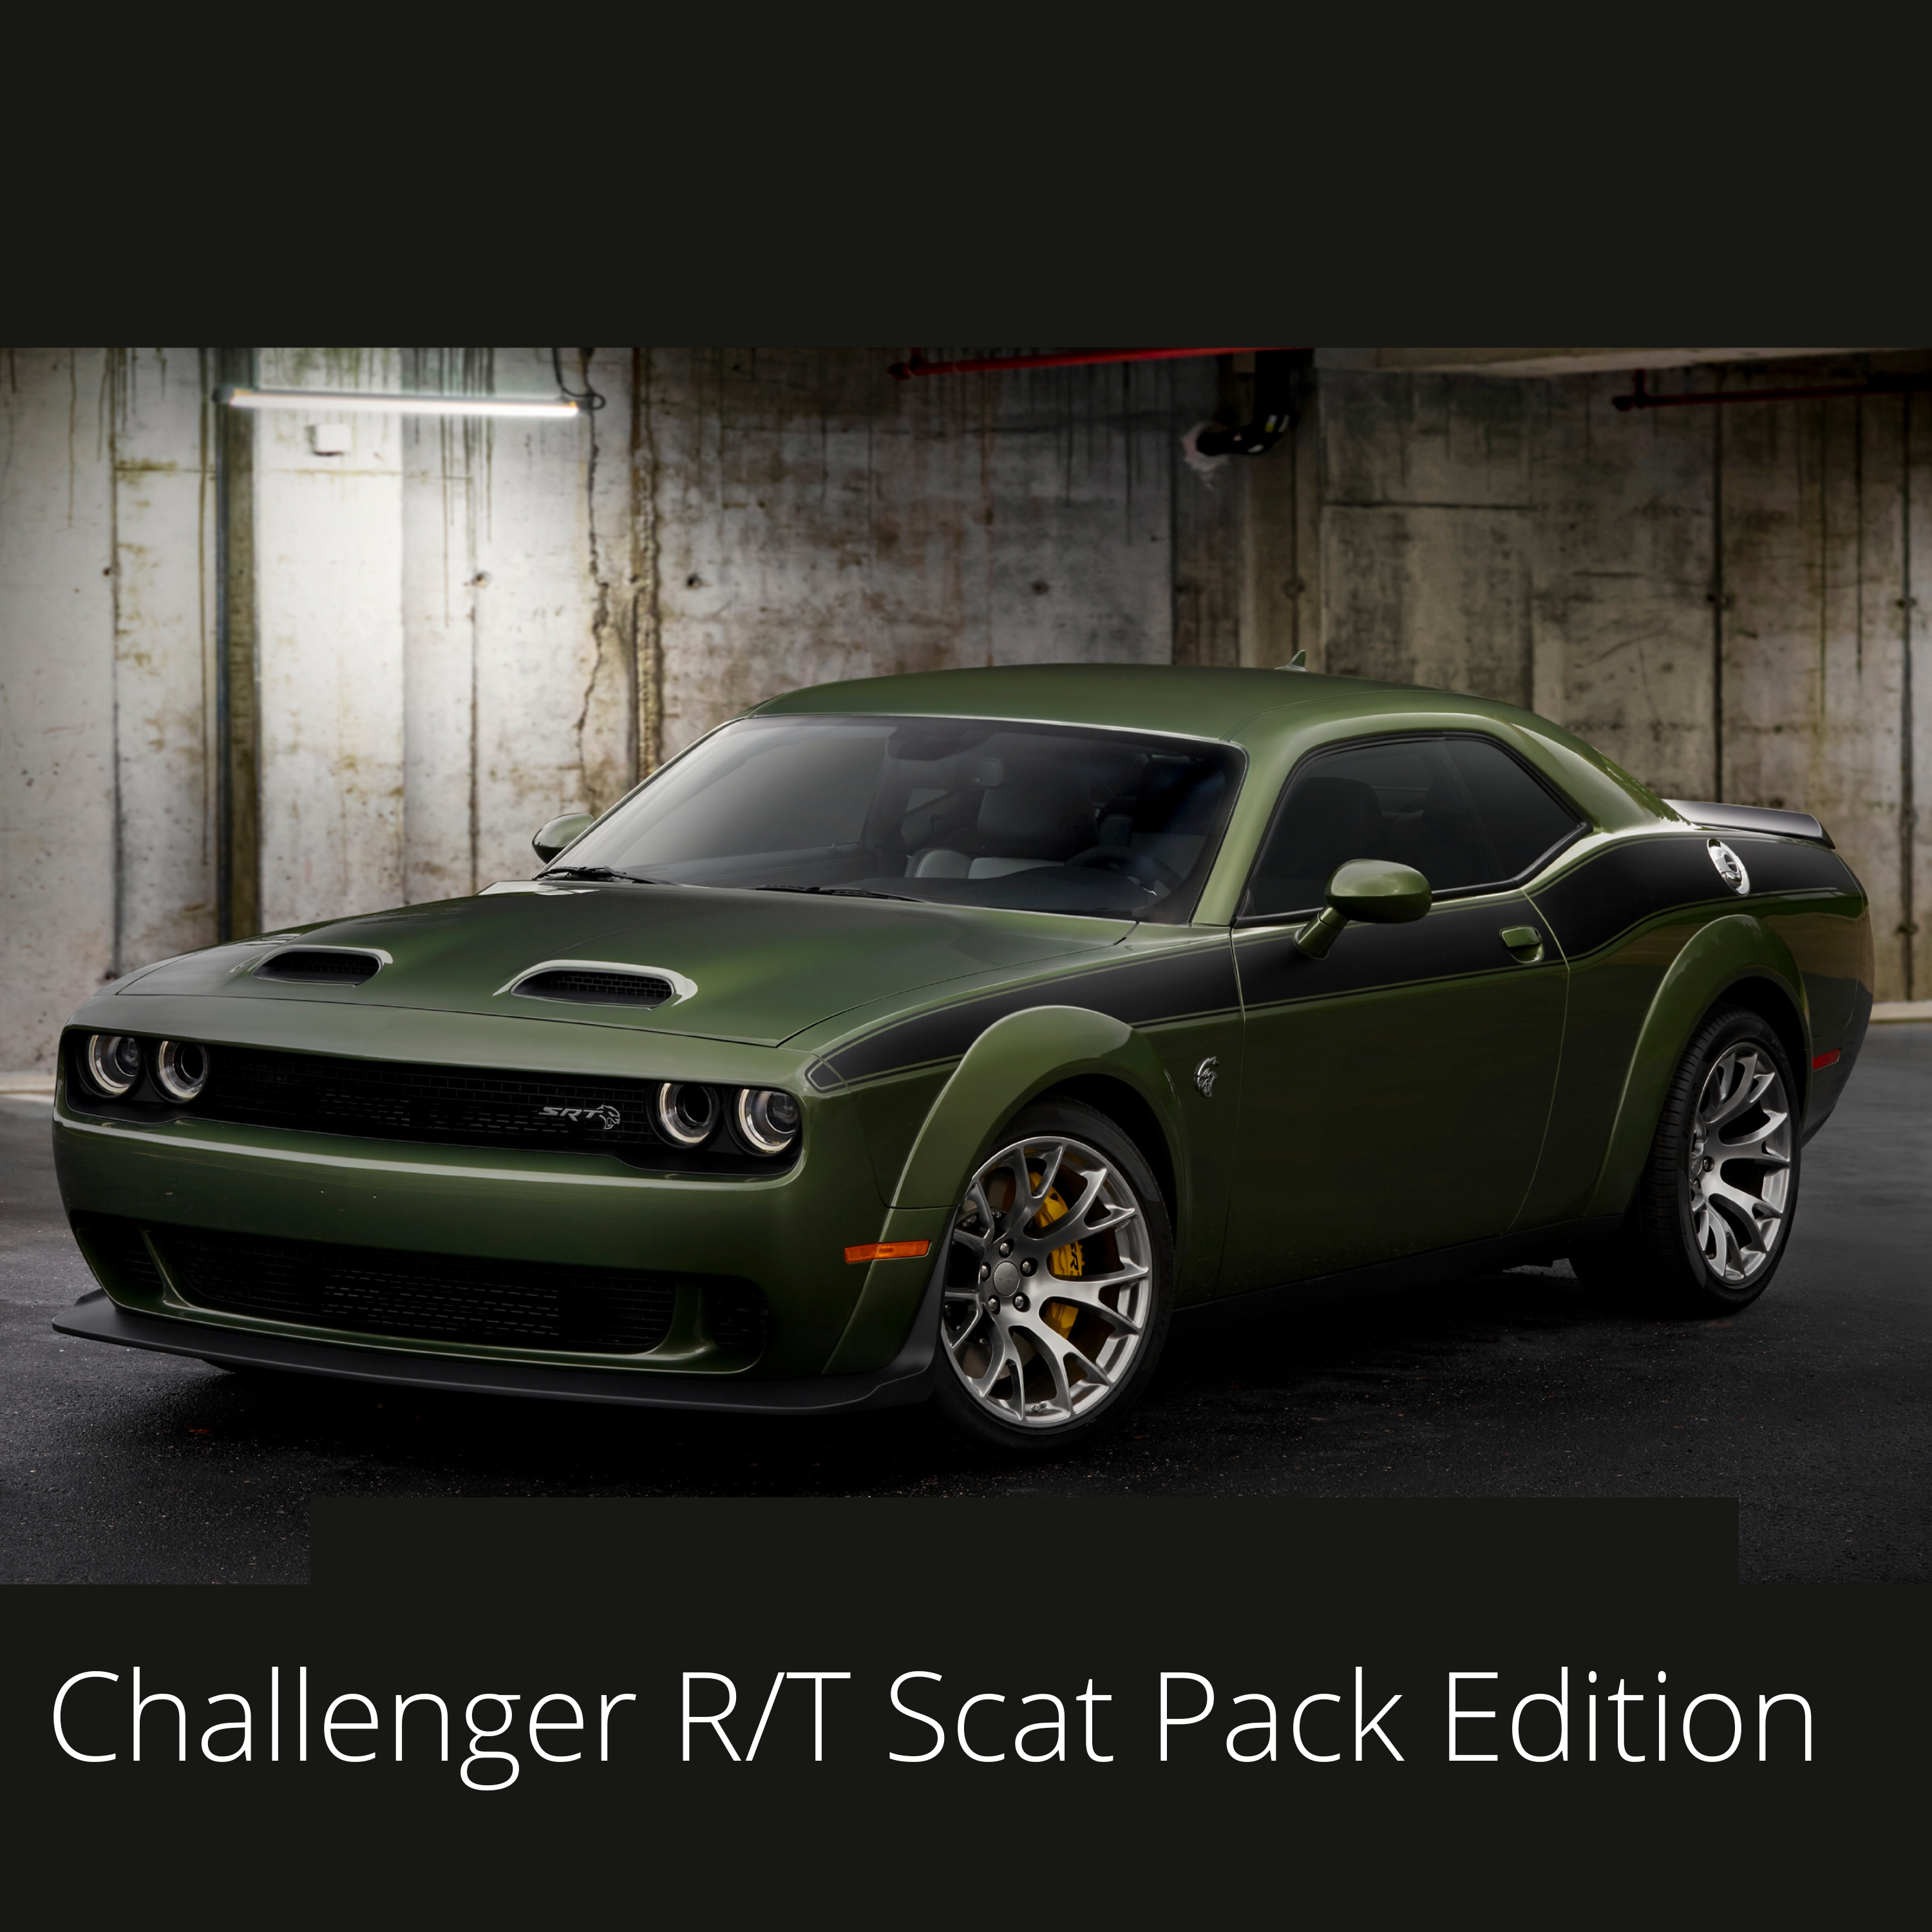 2022 - Challenger R/T Scat Pack Edition